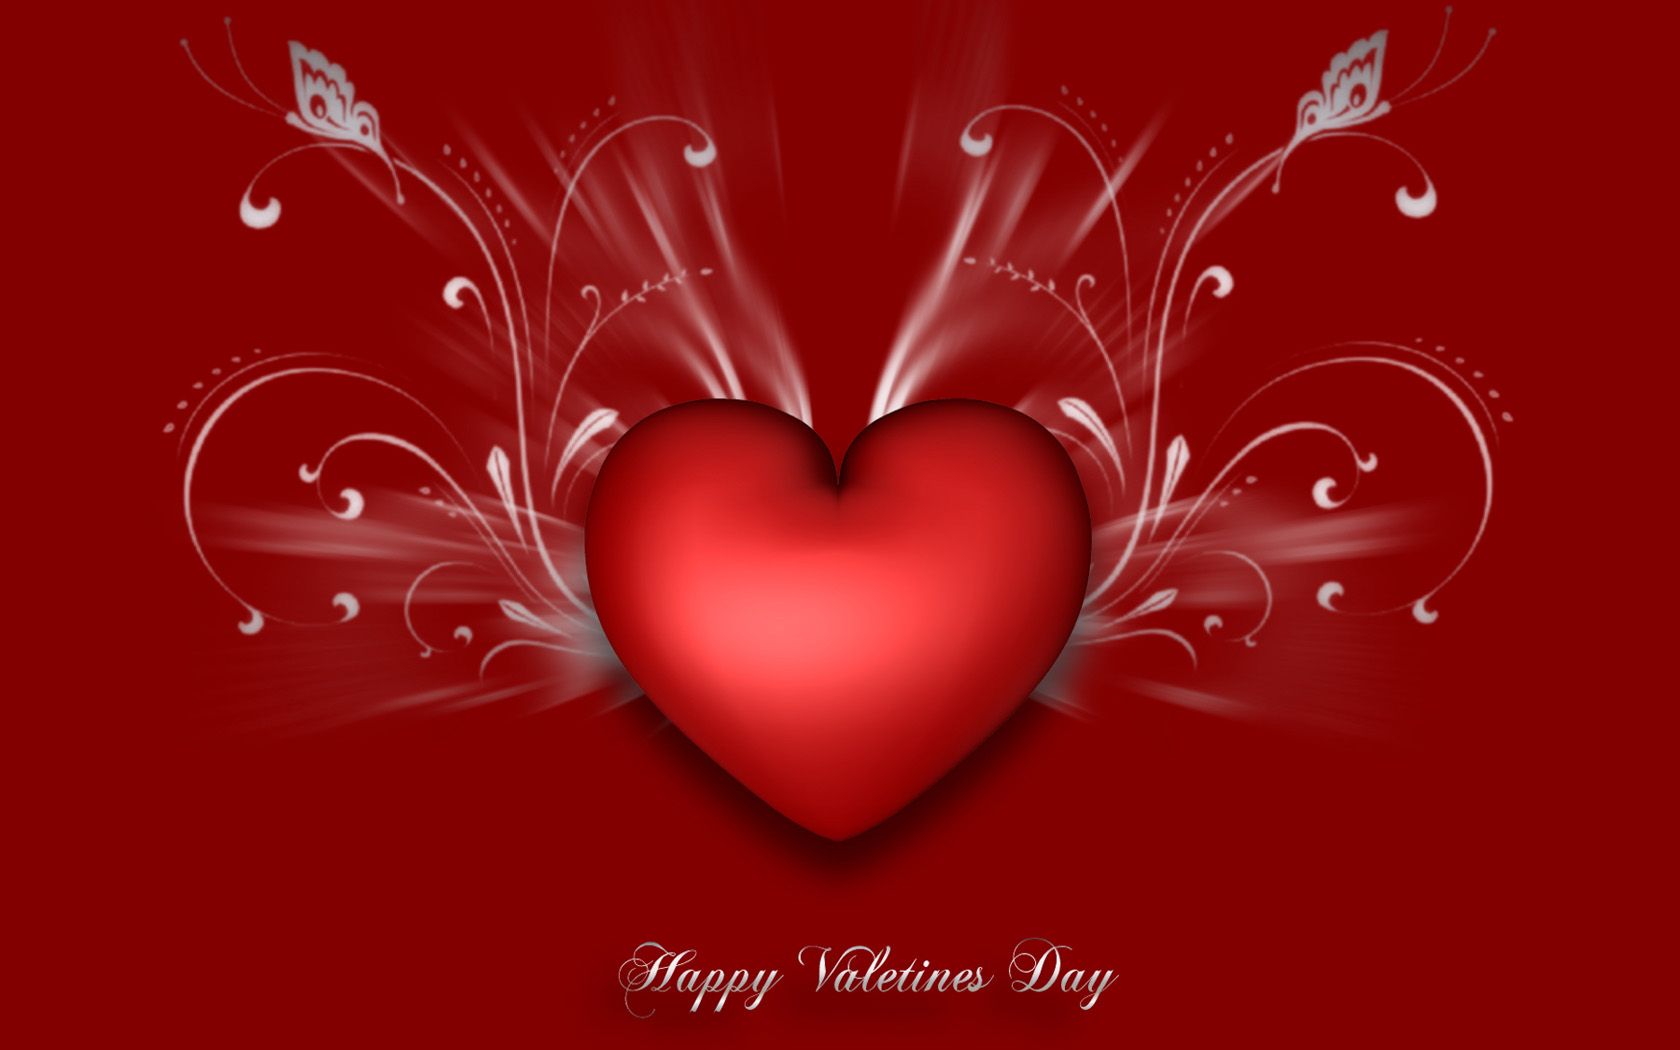 Happy Valentine's Day Wallpapers HD 2016 | Wallpapers, Backgrounds ...